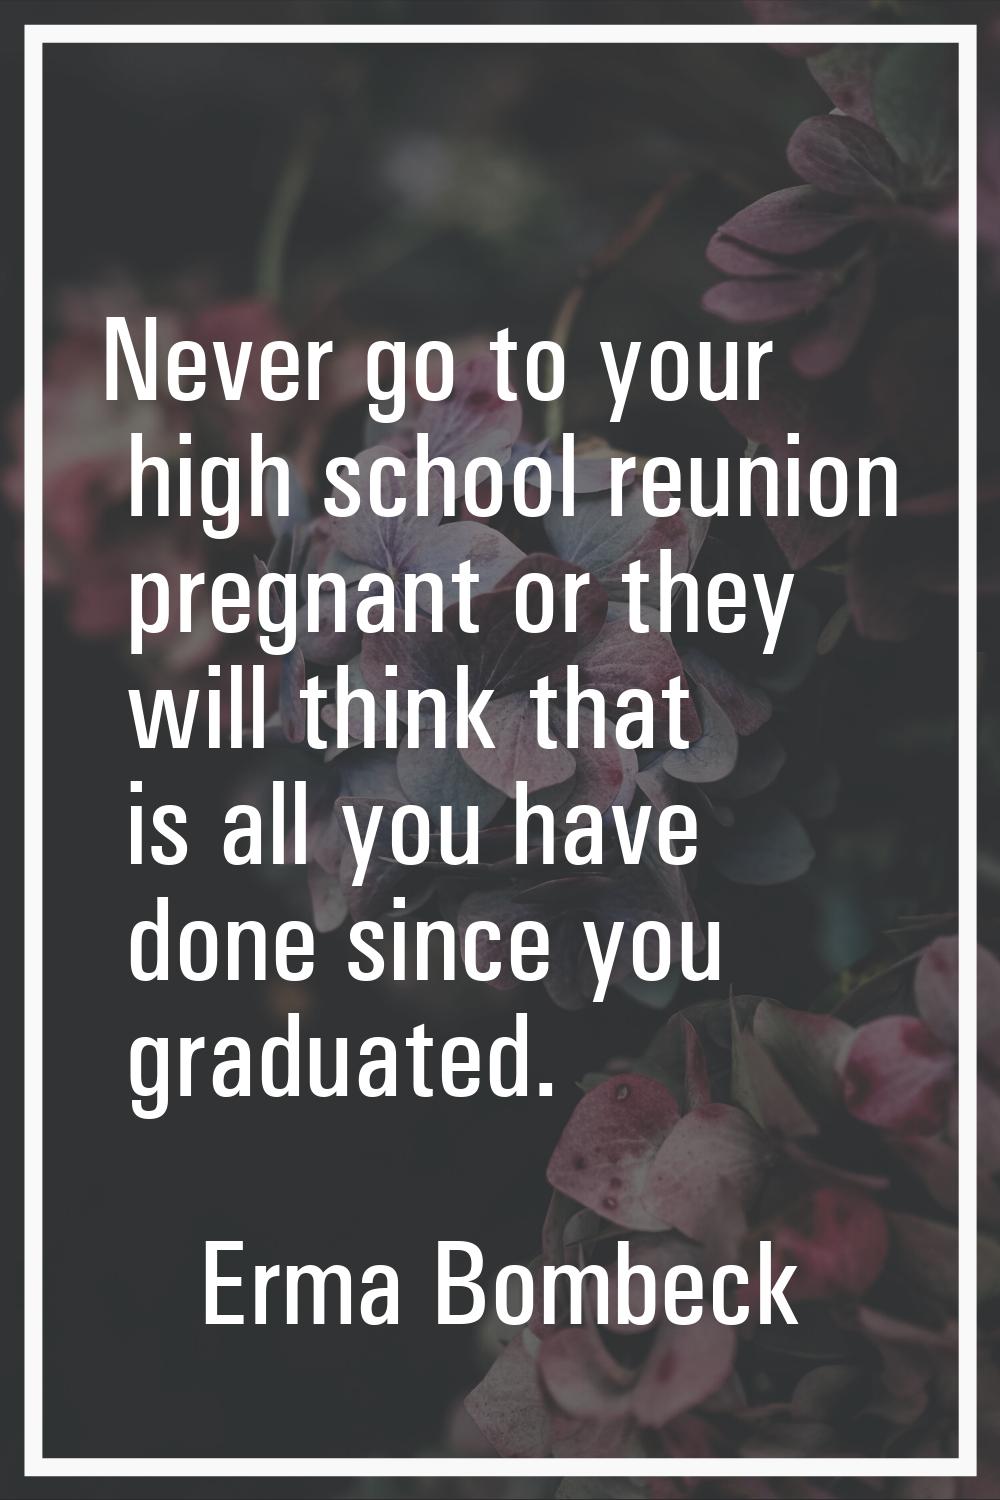 Never go to your high school reunion pregnant or they will think that is all you have done since yo